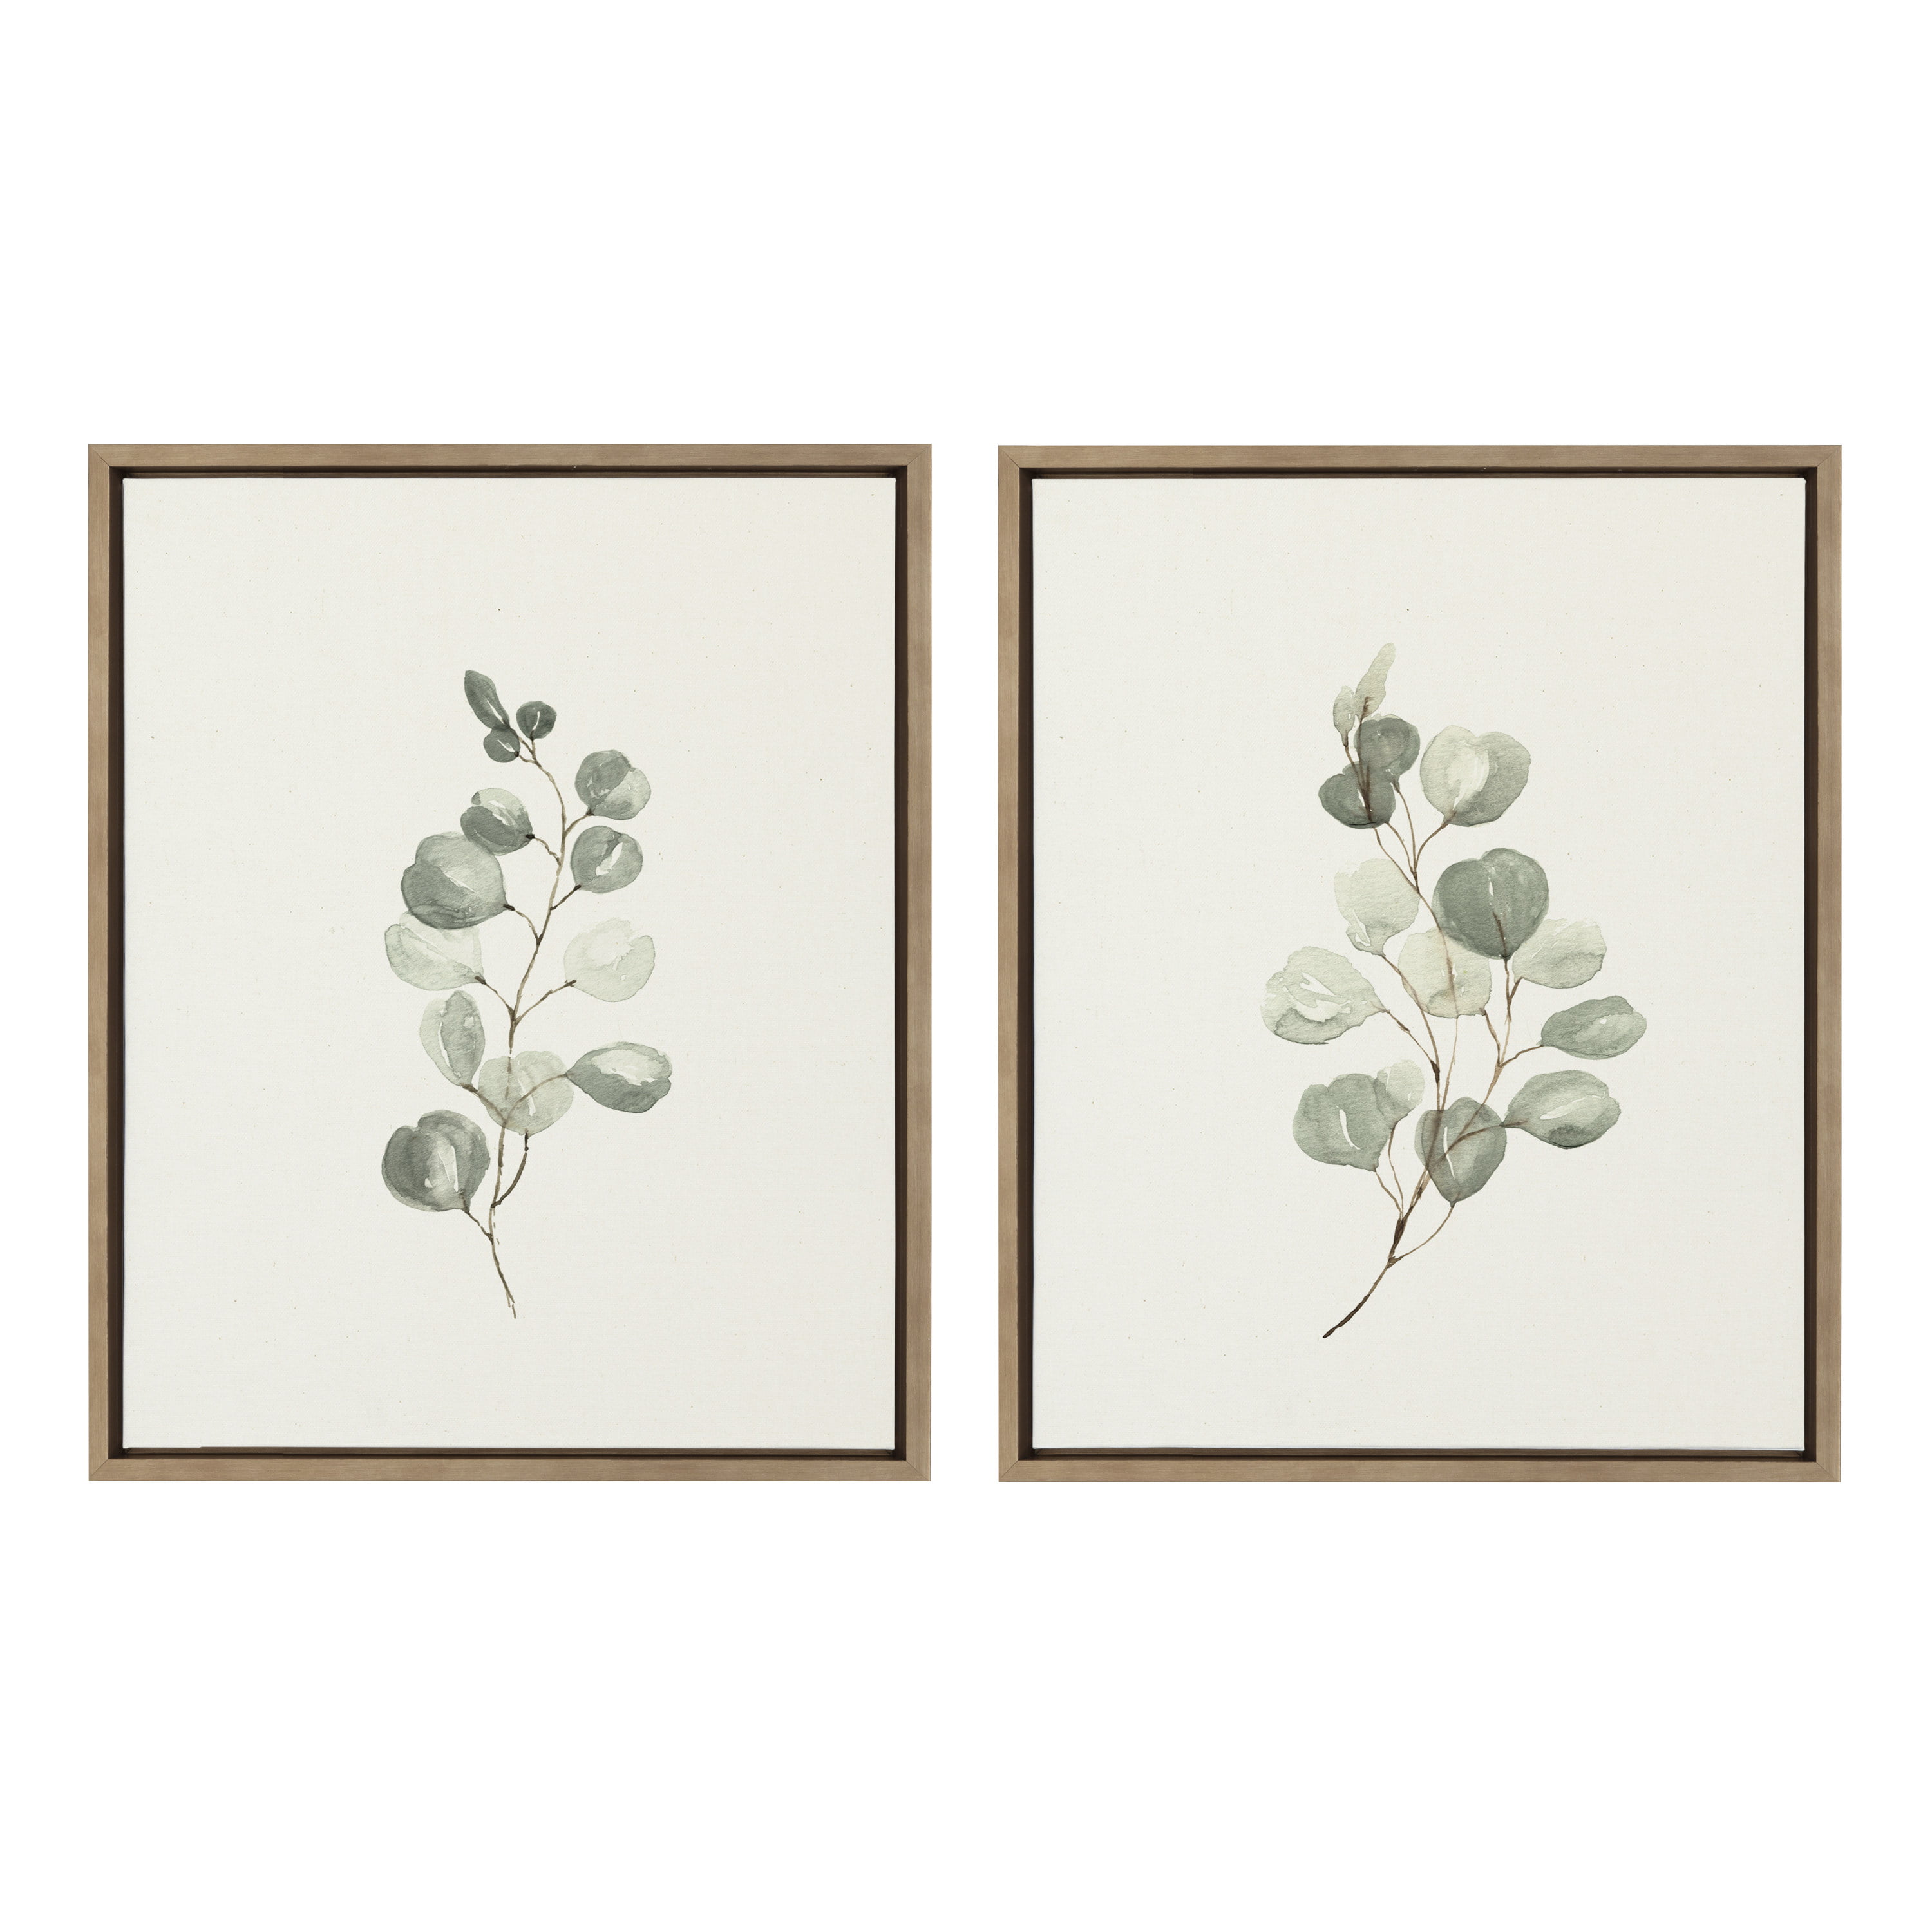 Kate and Laurel Sylvie Eucalyptus Framed Linen Textured Canvas Wall Art Set  by Maja Mitrovic of Makes My Day Happy, 18x24 Gold, Decorative Botanical 